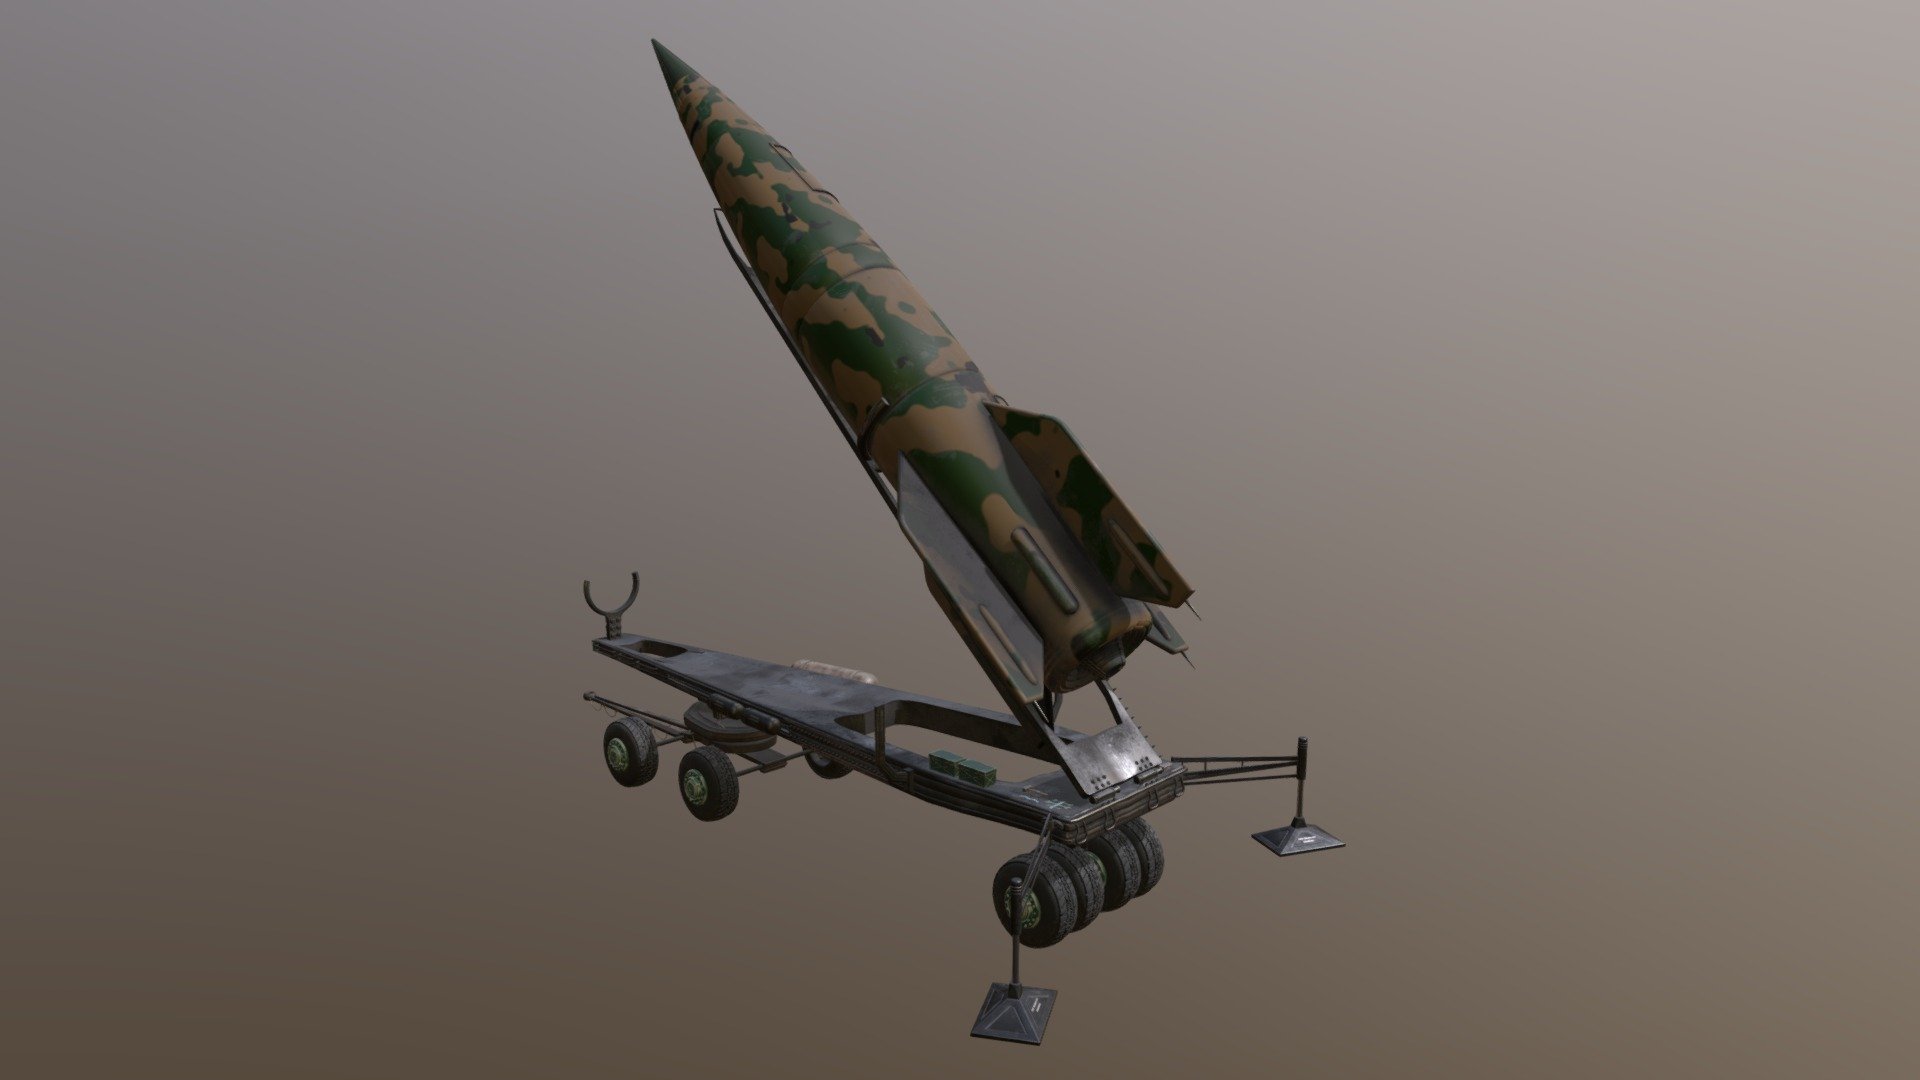 V2 rocket with ramp for Opel Blitz
plug and play
gizmos ready for animation
All handmade textures too Substance painter.
Easy to make own game 3d model